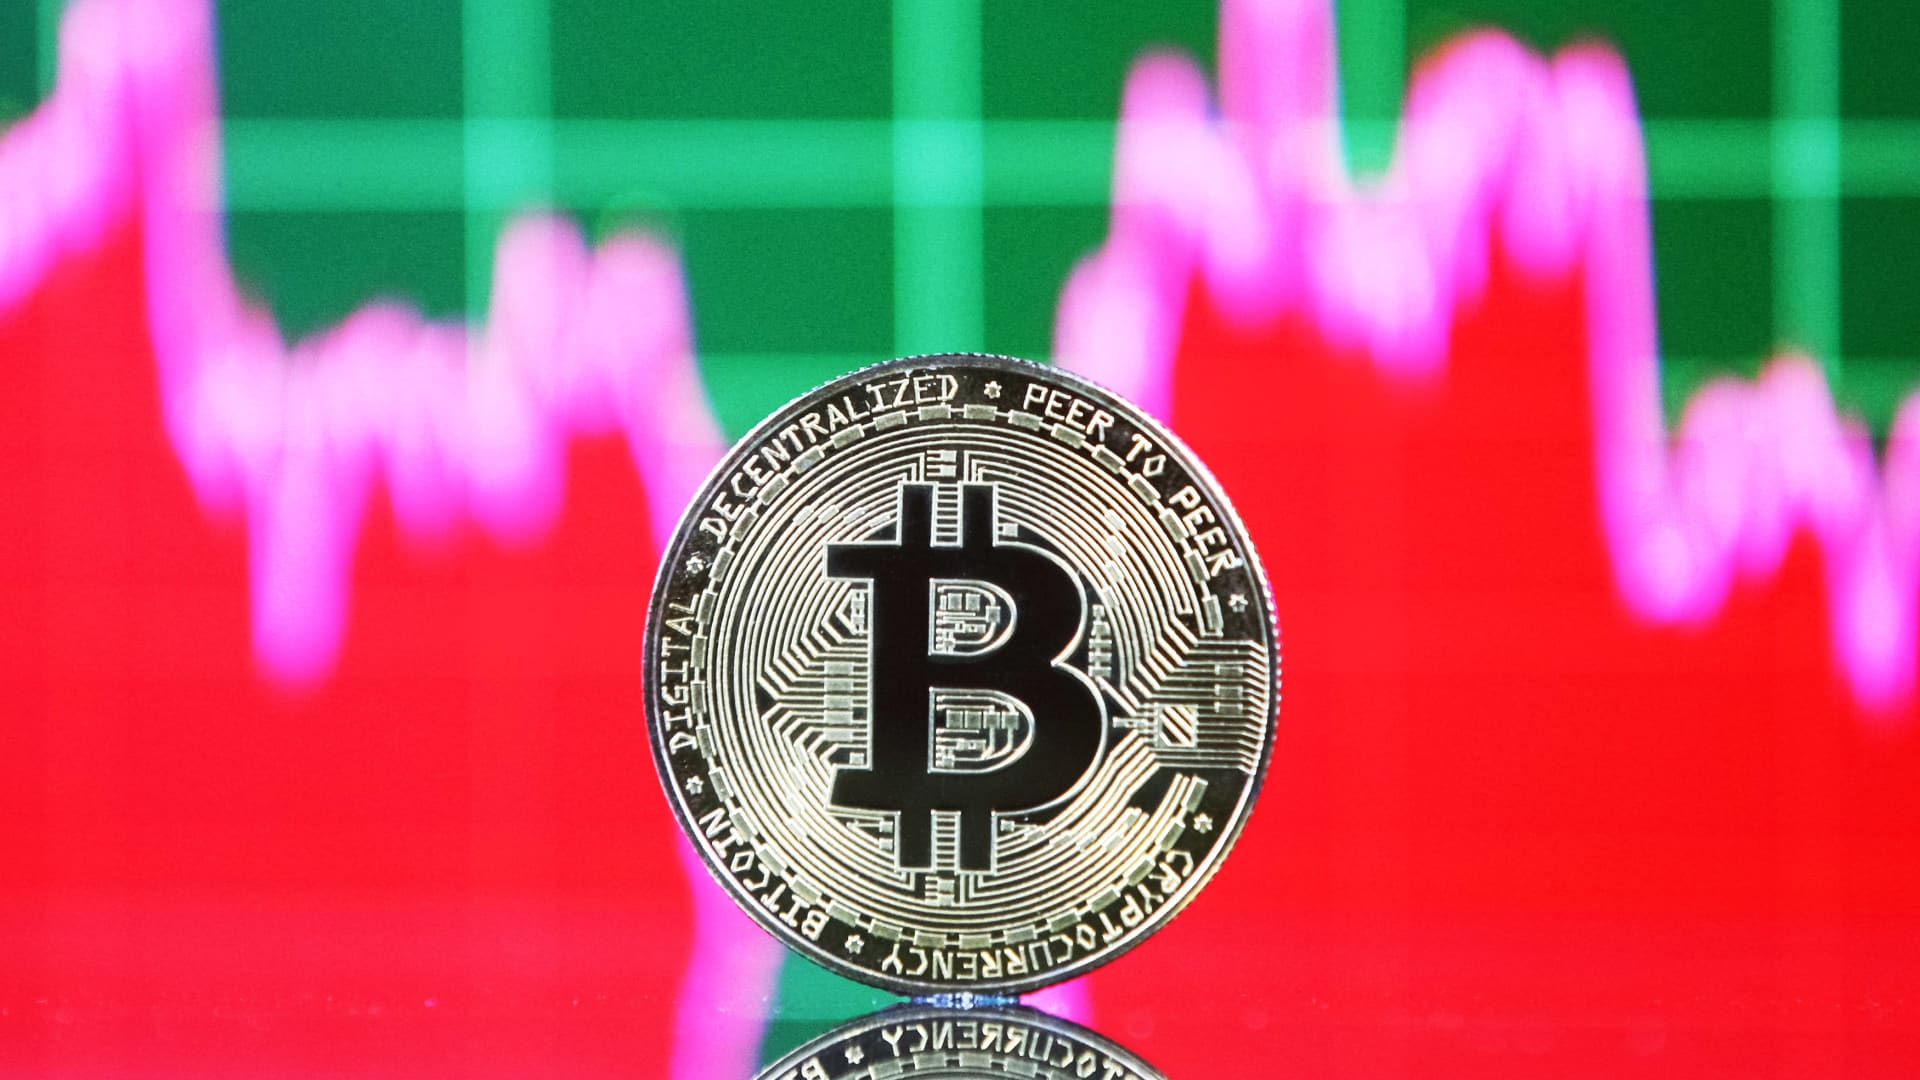 Bitcoin could plunge even further to a low of $13,000, one strategist warns